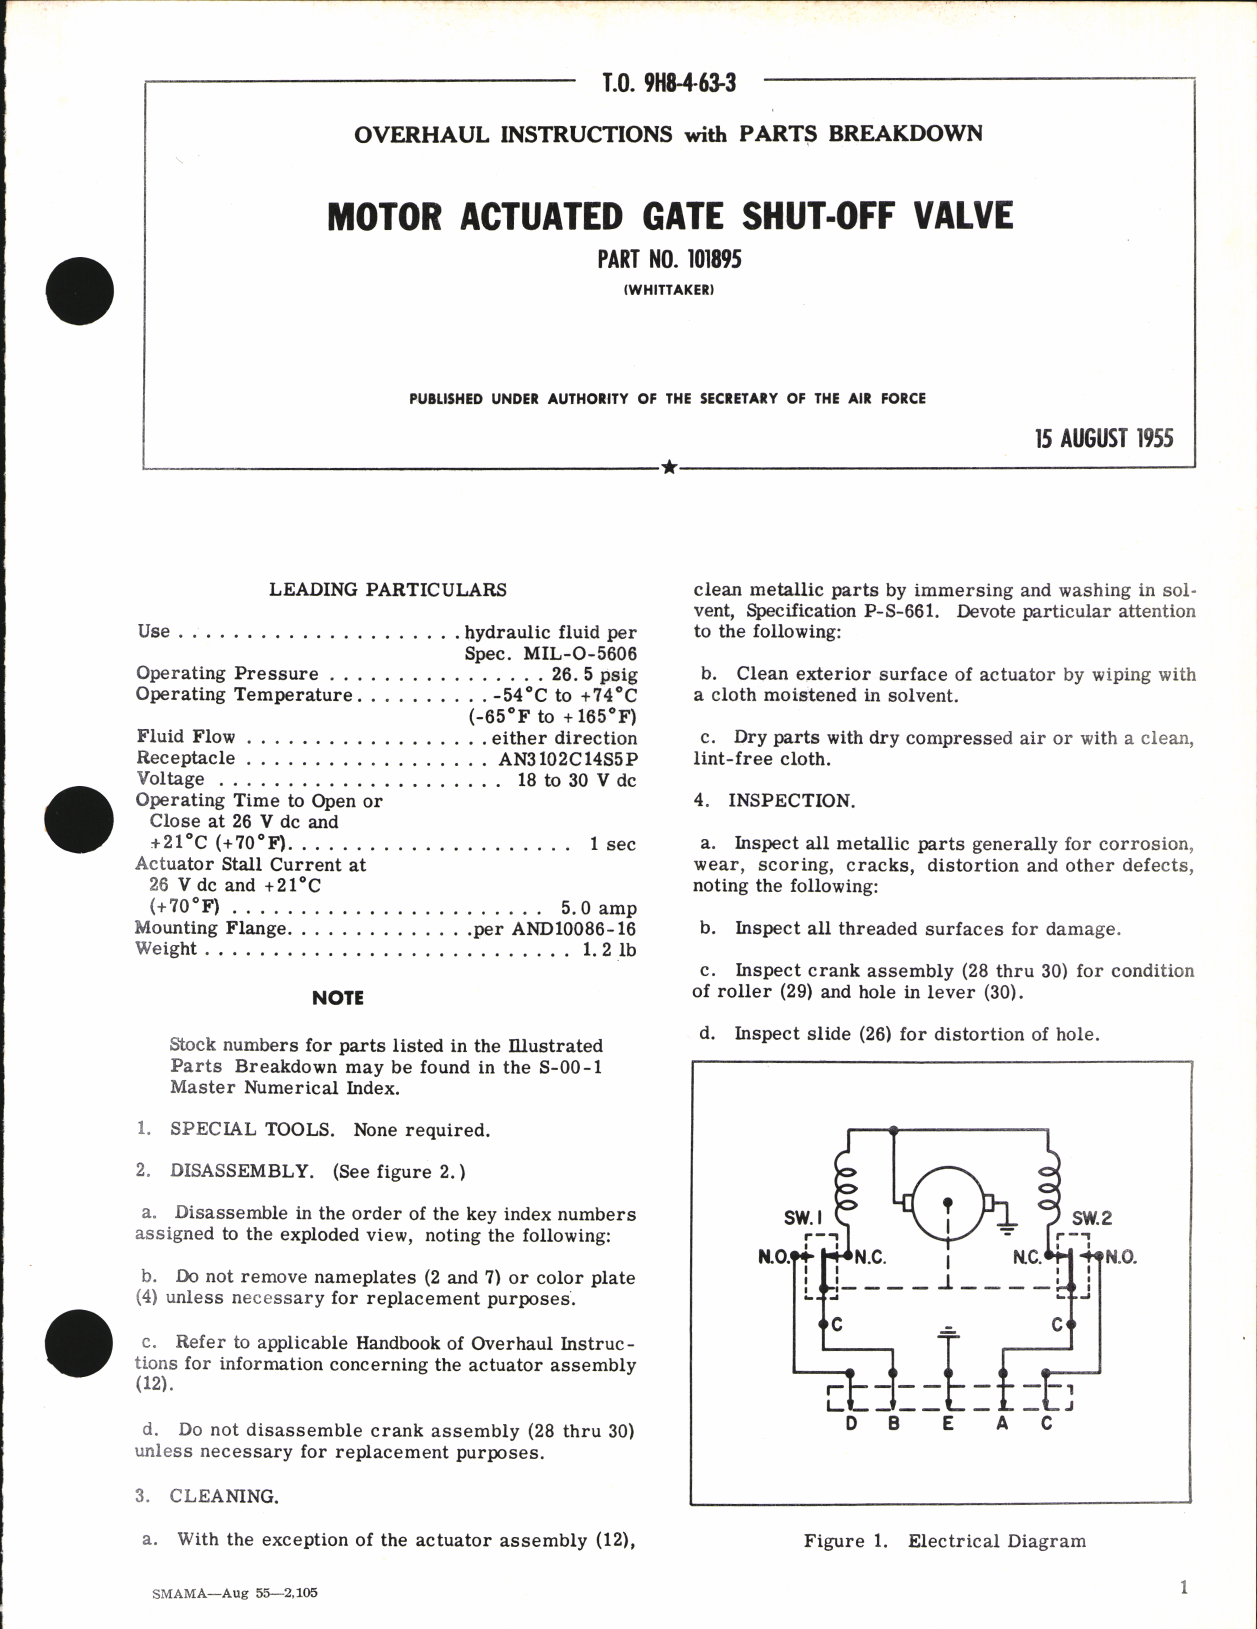 Sample page 1 from AirCorps Library document: Overhaul Instructions with Parts Breakdown for Motor Actuated Gate Shut-Off Valve Part No. 101895